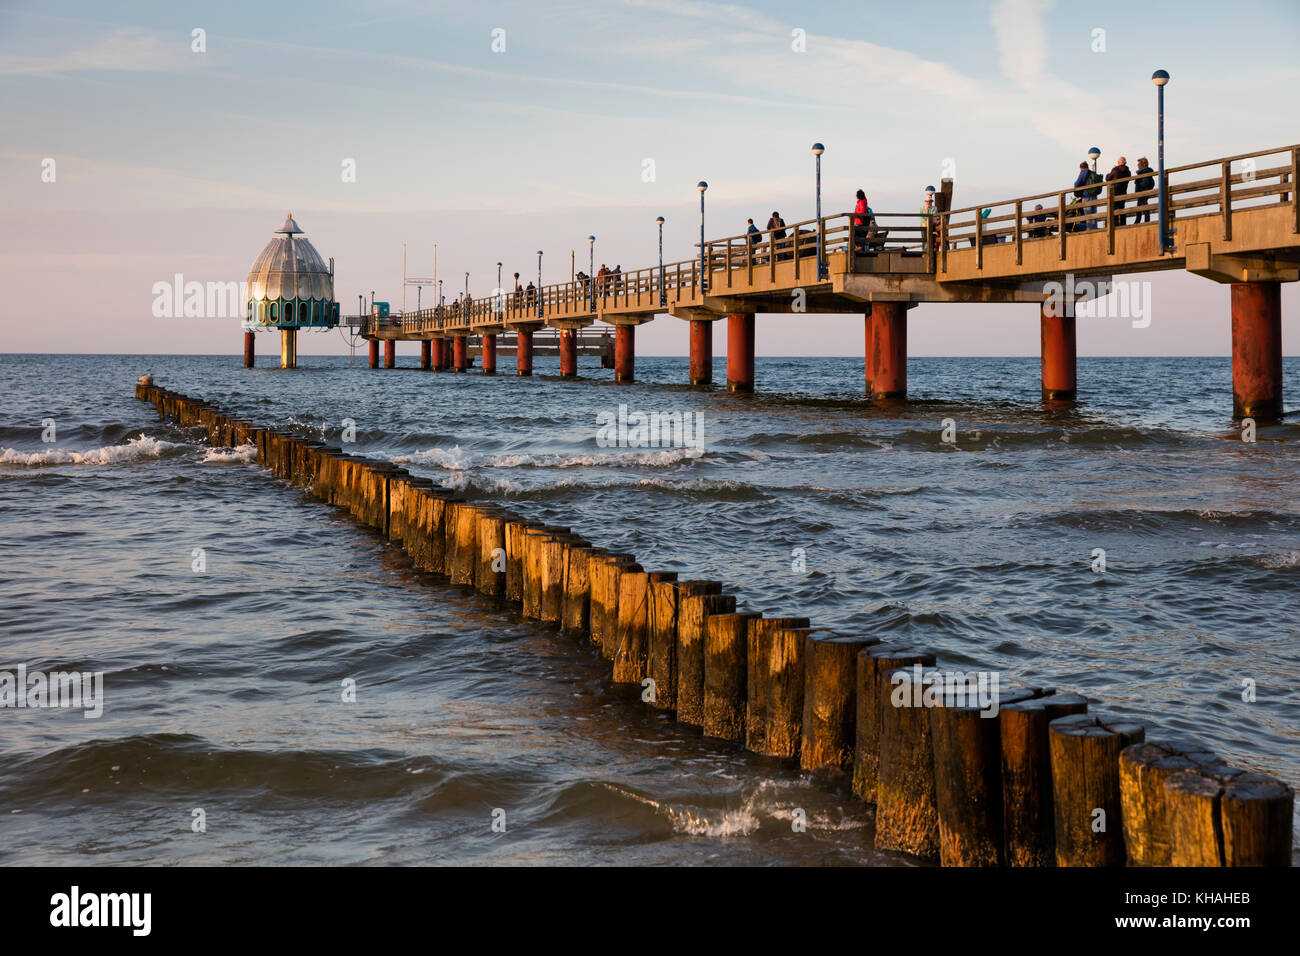 Zingst seebrucke Alamy stock and photography - images hi-res